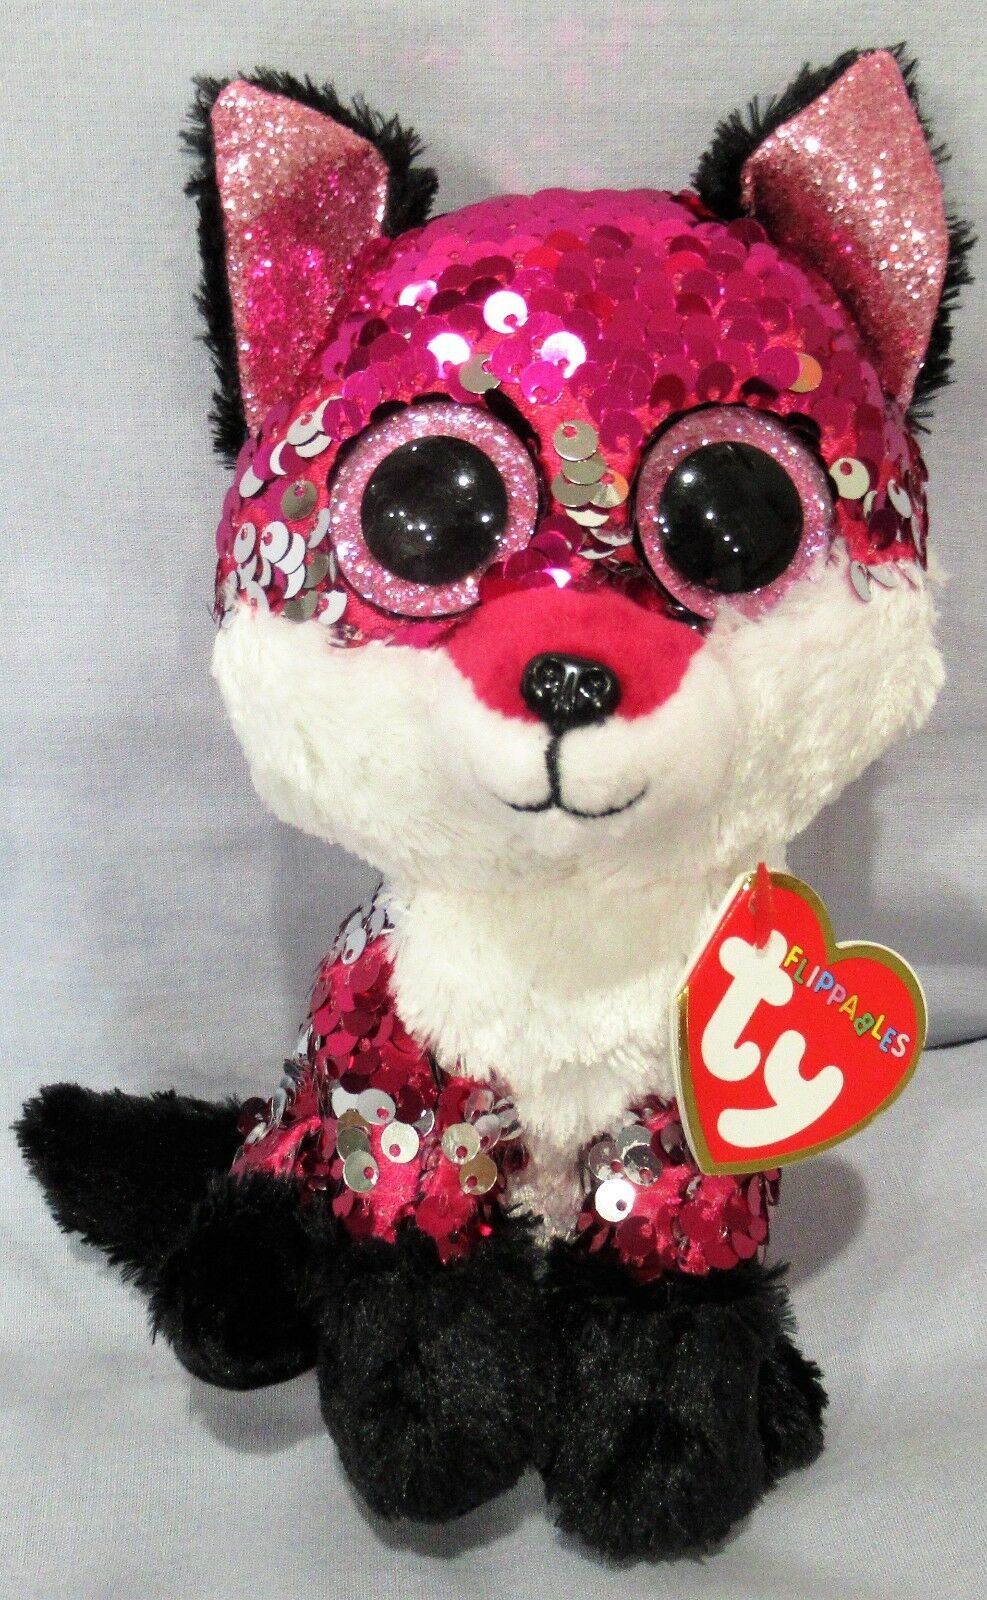 Jewel - Fox - Ty Flippables Sequin Beanie 6" Boos - New With Mint Tags